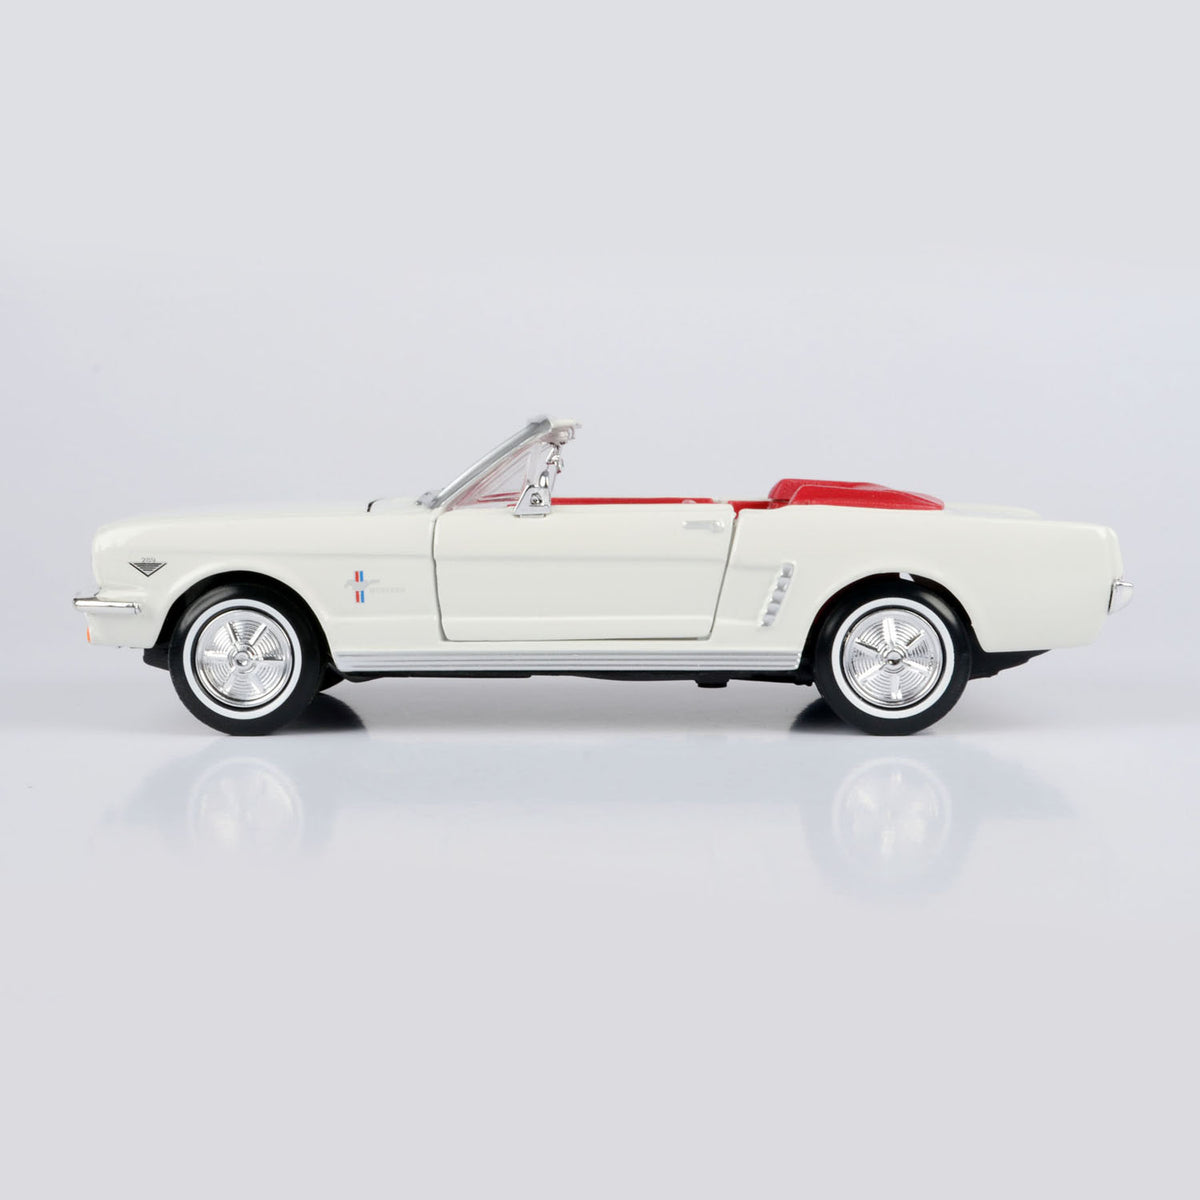 James Bond Ford Mustang Convertible Model Car - Goldfinger Edition - By Motormax